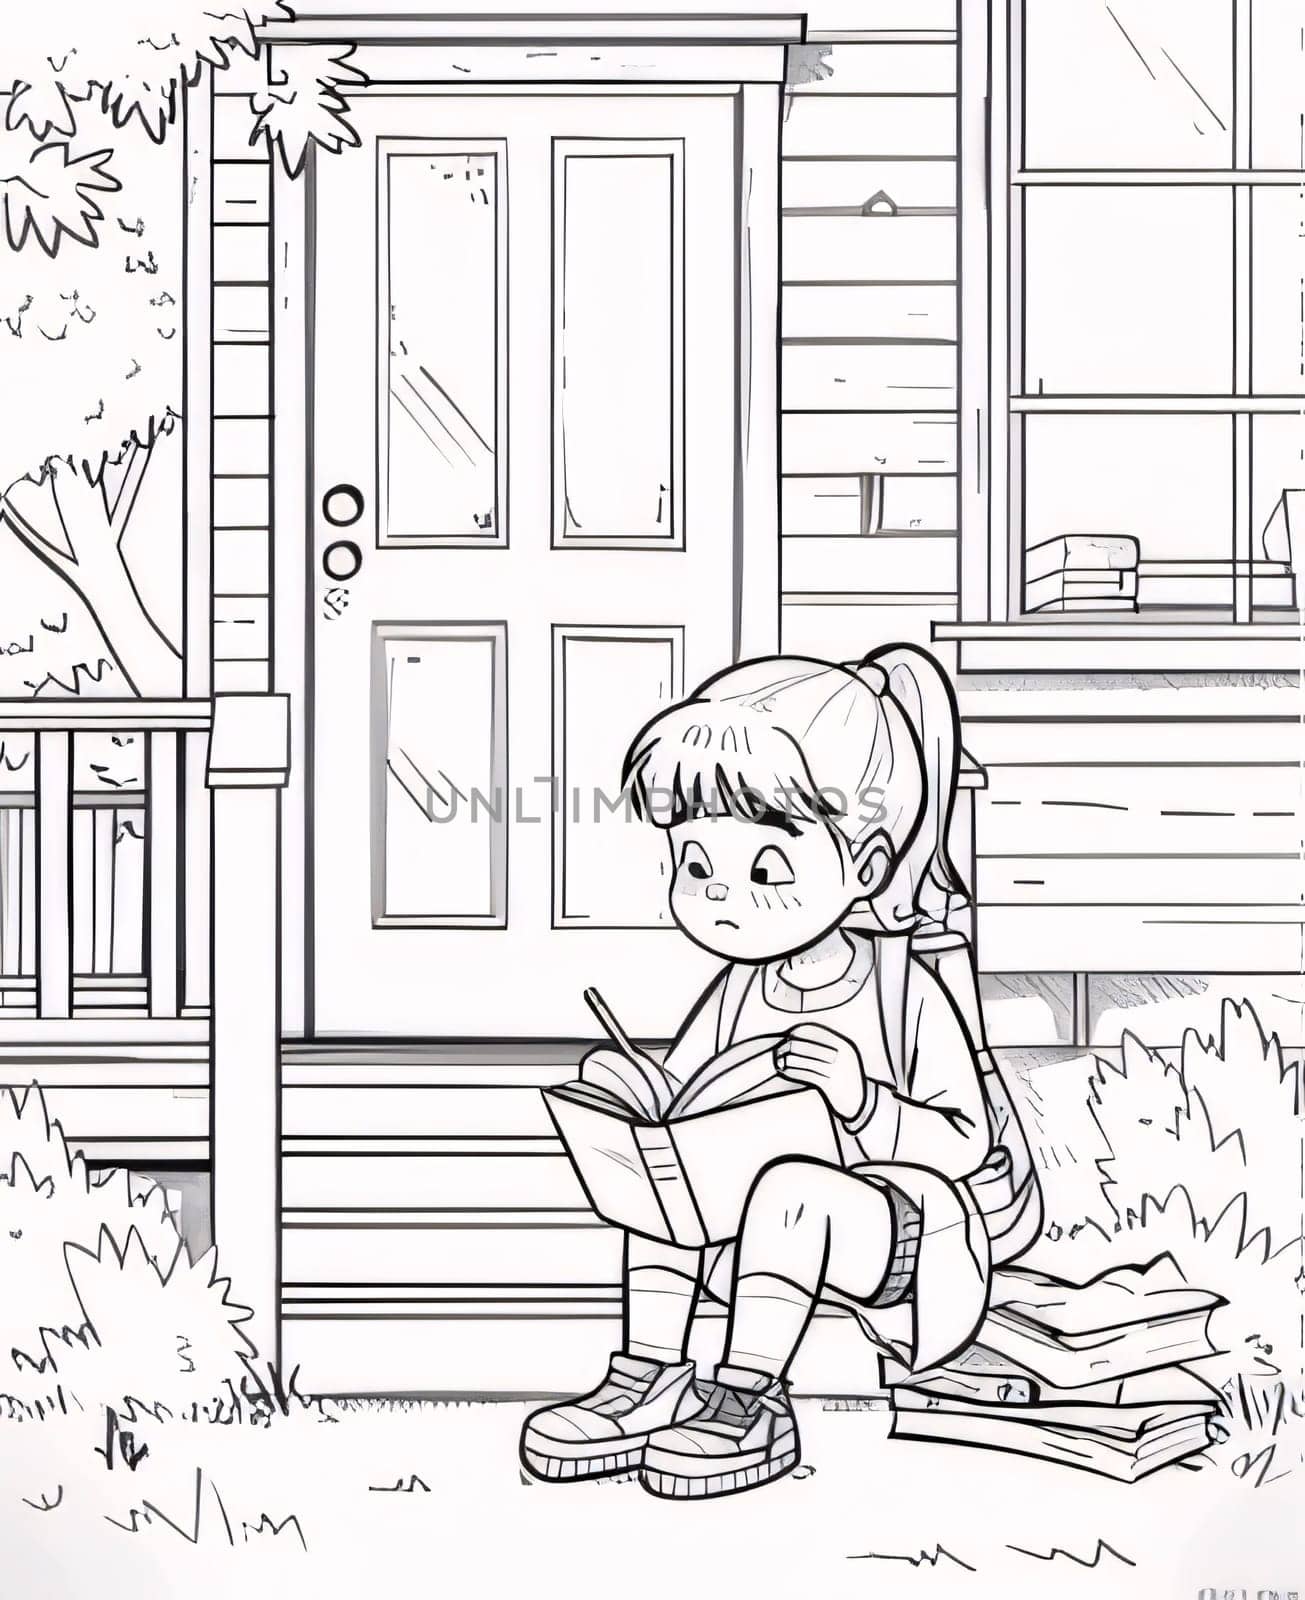 World Book Day: Illustration of a Little Boy Reading a Book While Sitting on the Front Door of a House